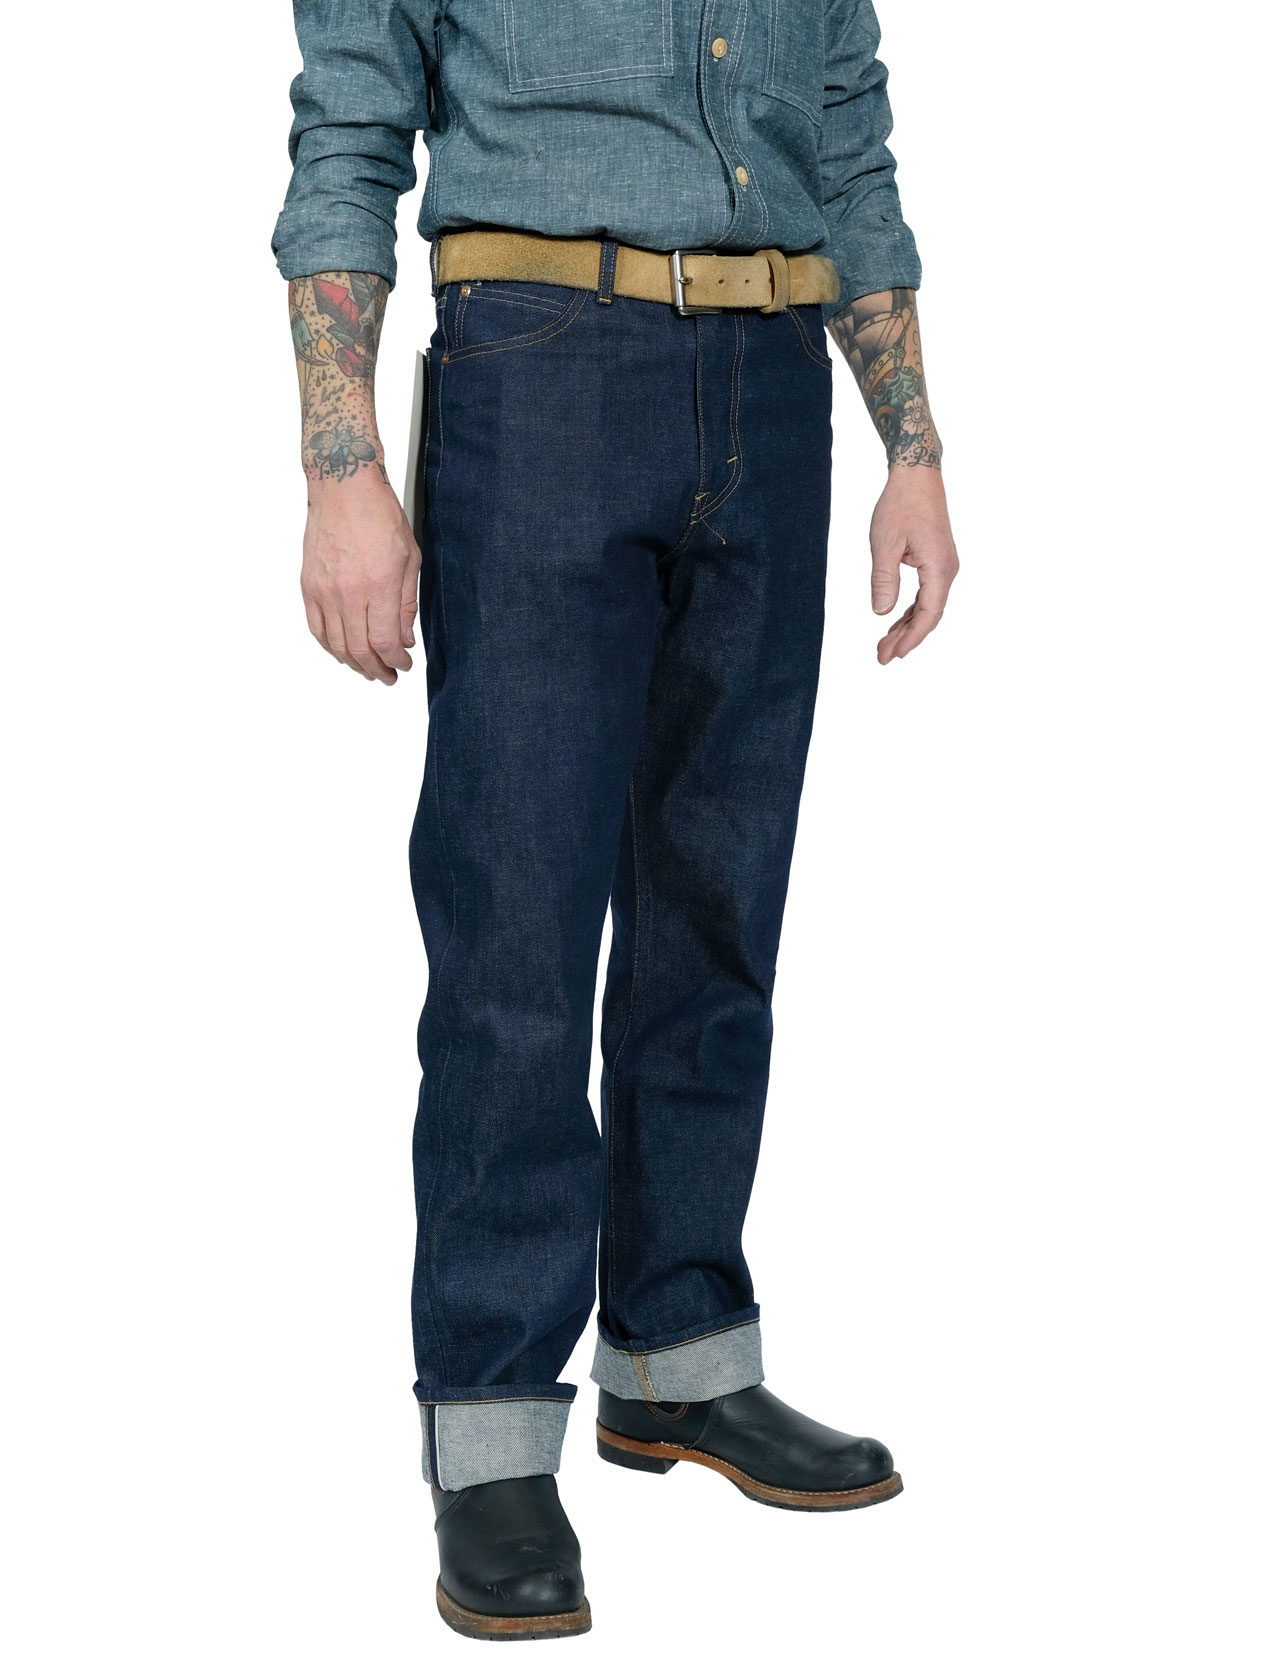 Buy the Lee 101 Z KA Jeans - Dry Blue Selvage @Union Clothing | Union  Clothing